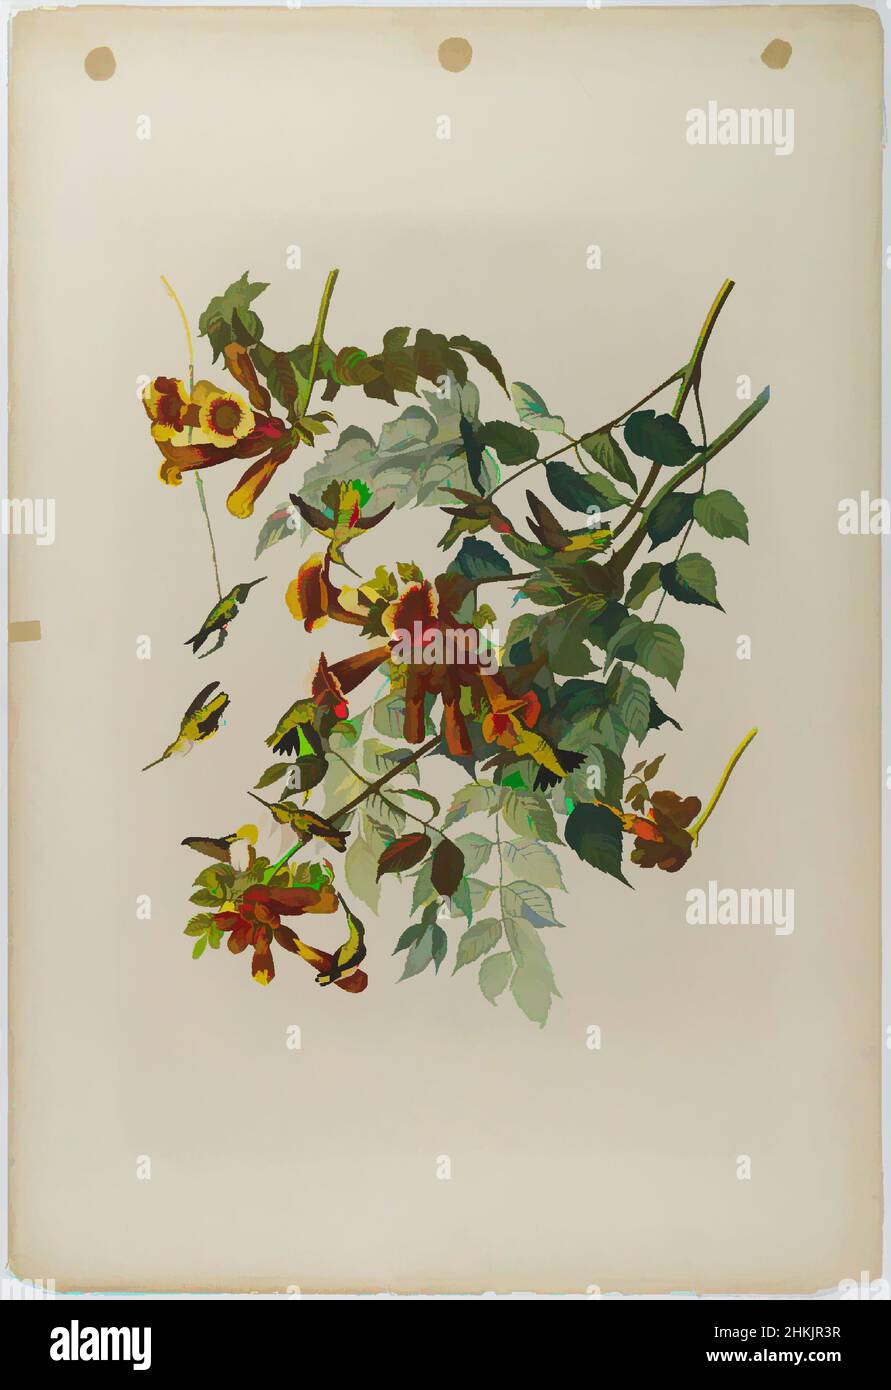 Art inspired by Ruby-throated Humming Bird, John James Audubon, American, born Haiti, 1785-1851, Chromolithograph, 1861, sheet: 40 x 27 1/2 in., 101.6 x 69.9 cm, Bignonia radicans, birds, blossoms, branches, fauna, flight, flora, flowers, leaves, nature study, ornithology, Trochilus, Classic works modernized by Artotop with a splash of modernity. Shapes, color and value, eye-catching visual impact on art. Emotions through freedom of artworks in a contemporary way. A timeless message pursuing a wildly creative new direction. Artists turning to the digital medium and creating the Artotop NFT Stock Photo